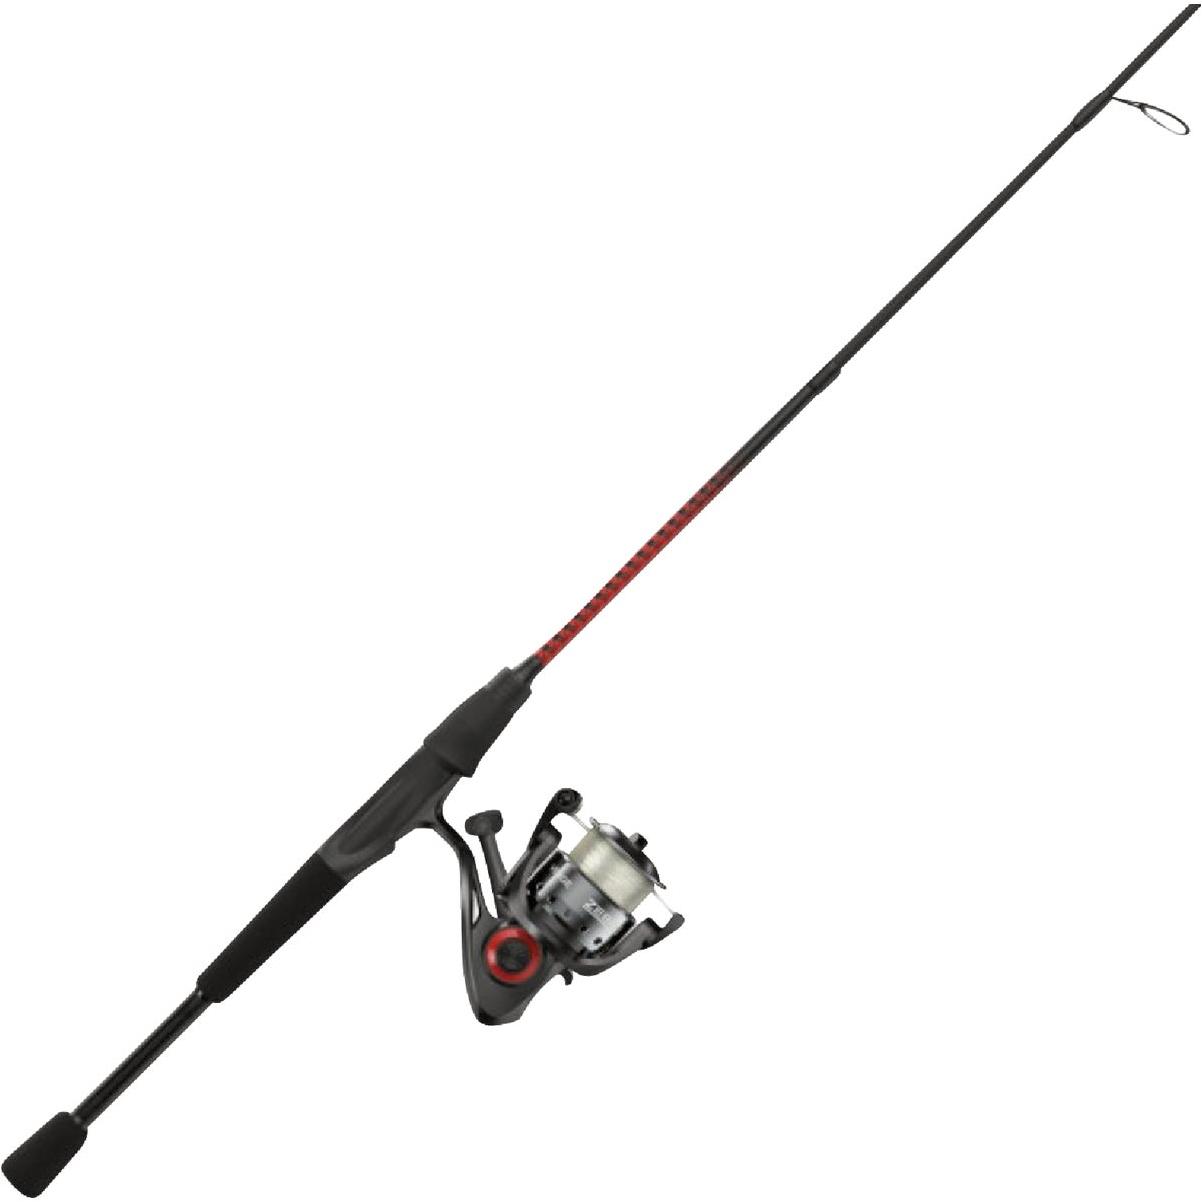 Zebco 33 5 Ft. 6 In. Z-Glass Fishing Rod & Spincast Reel with Tackle Wallet  - Anderson Lumber